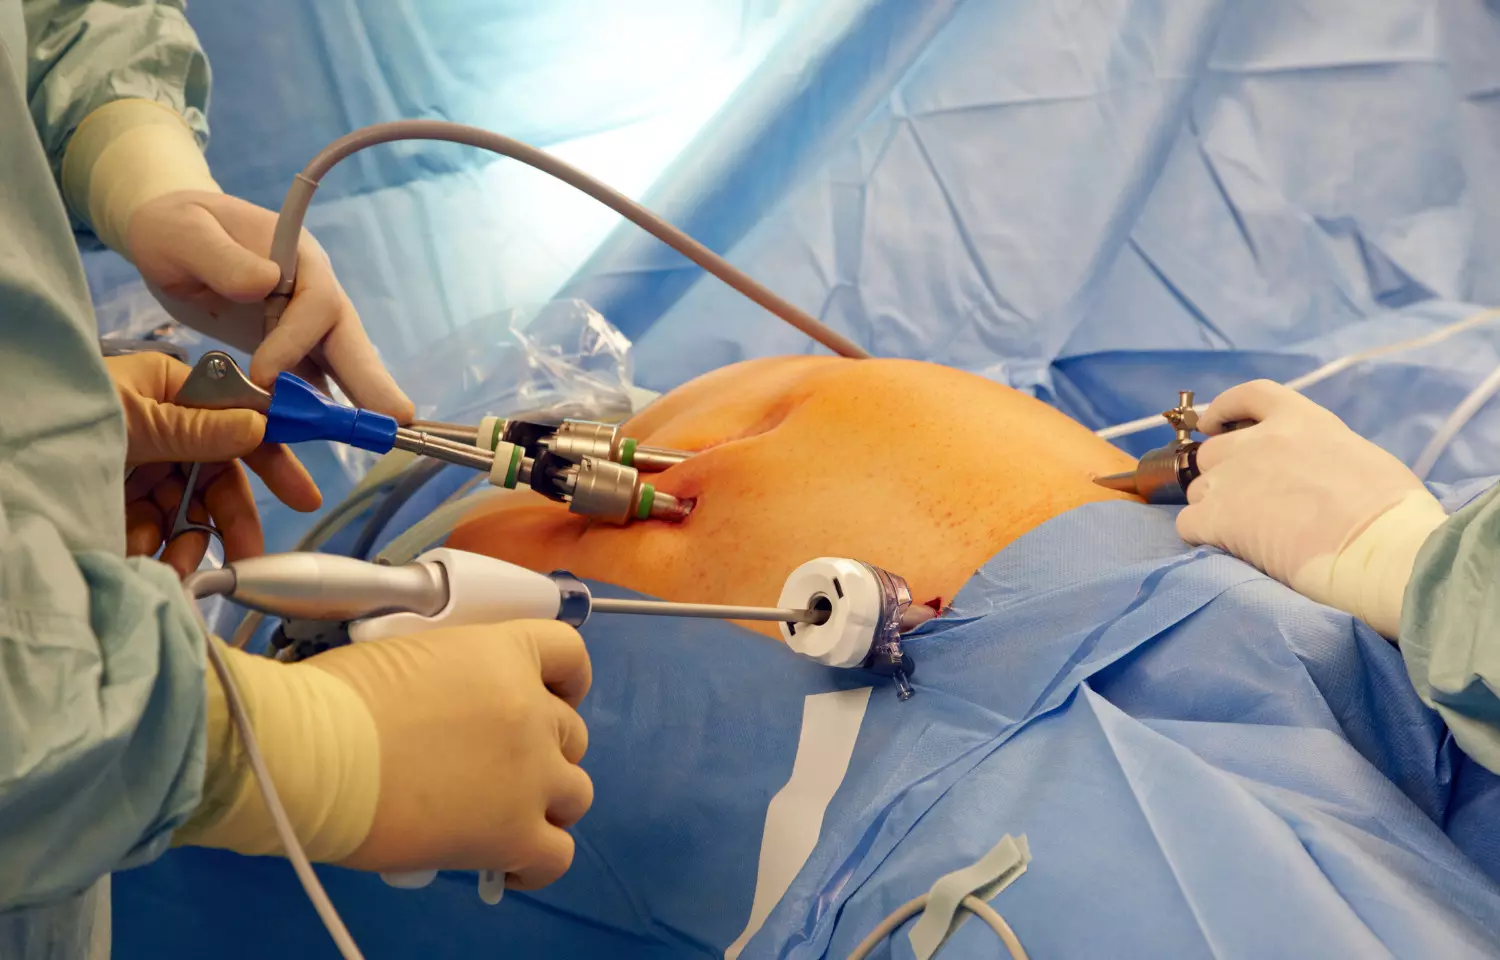 Less invasive, more precise surgery may be performed by a magnetic needle